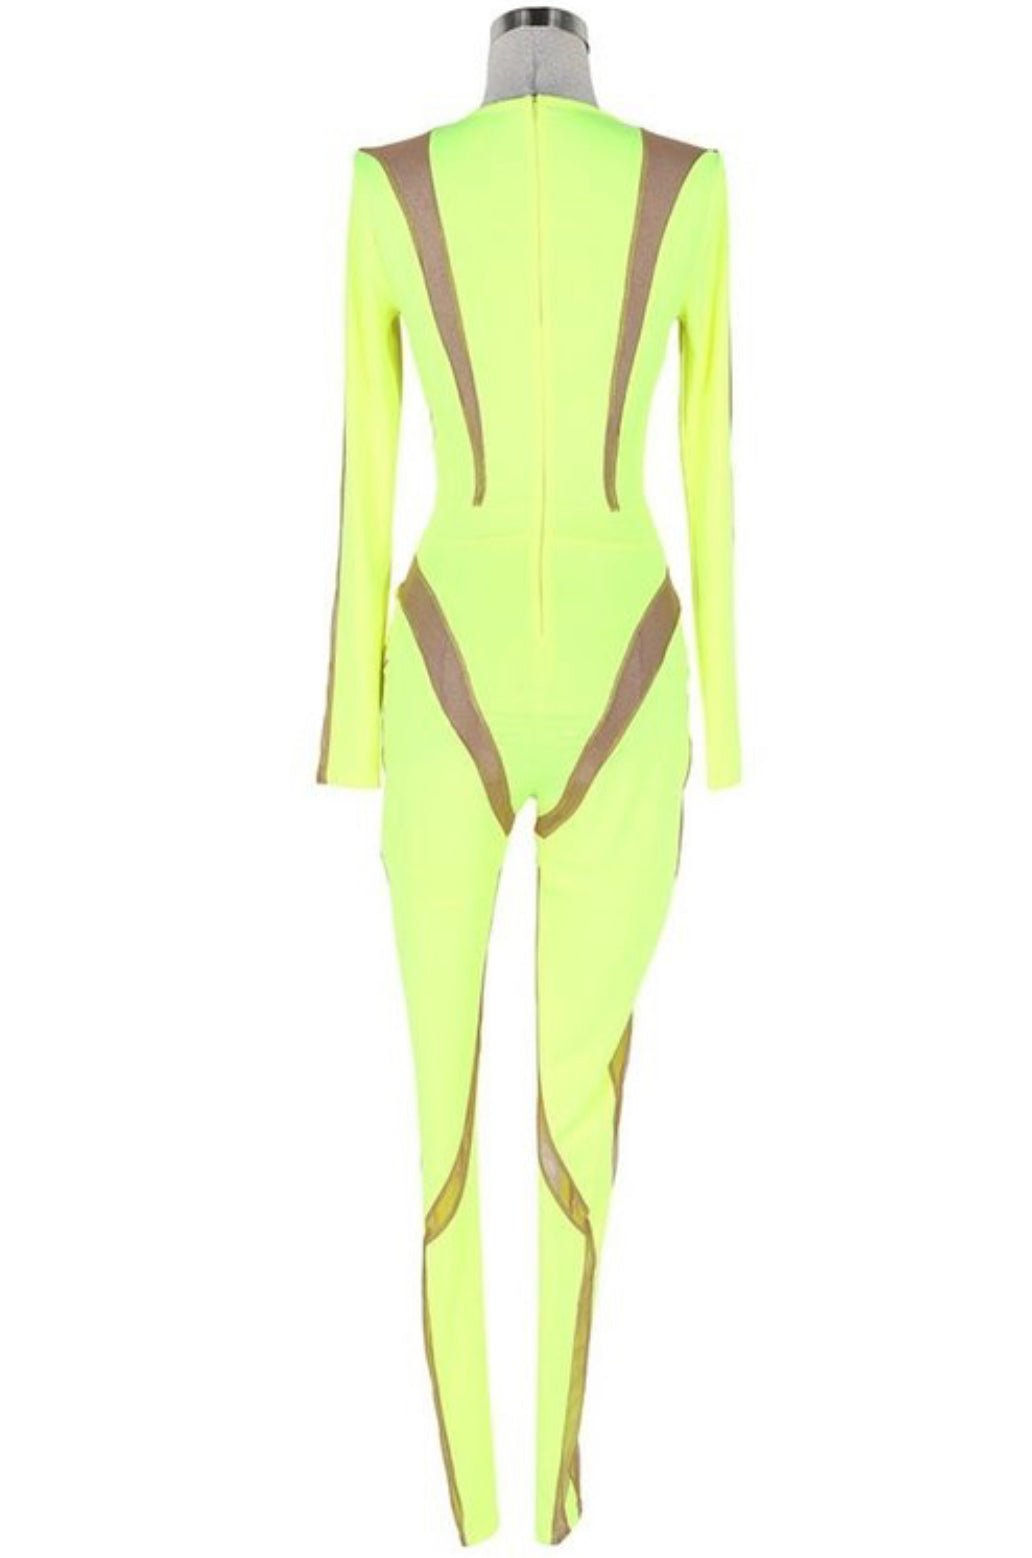 The Possibilities V-Mesh Jumpsuit